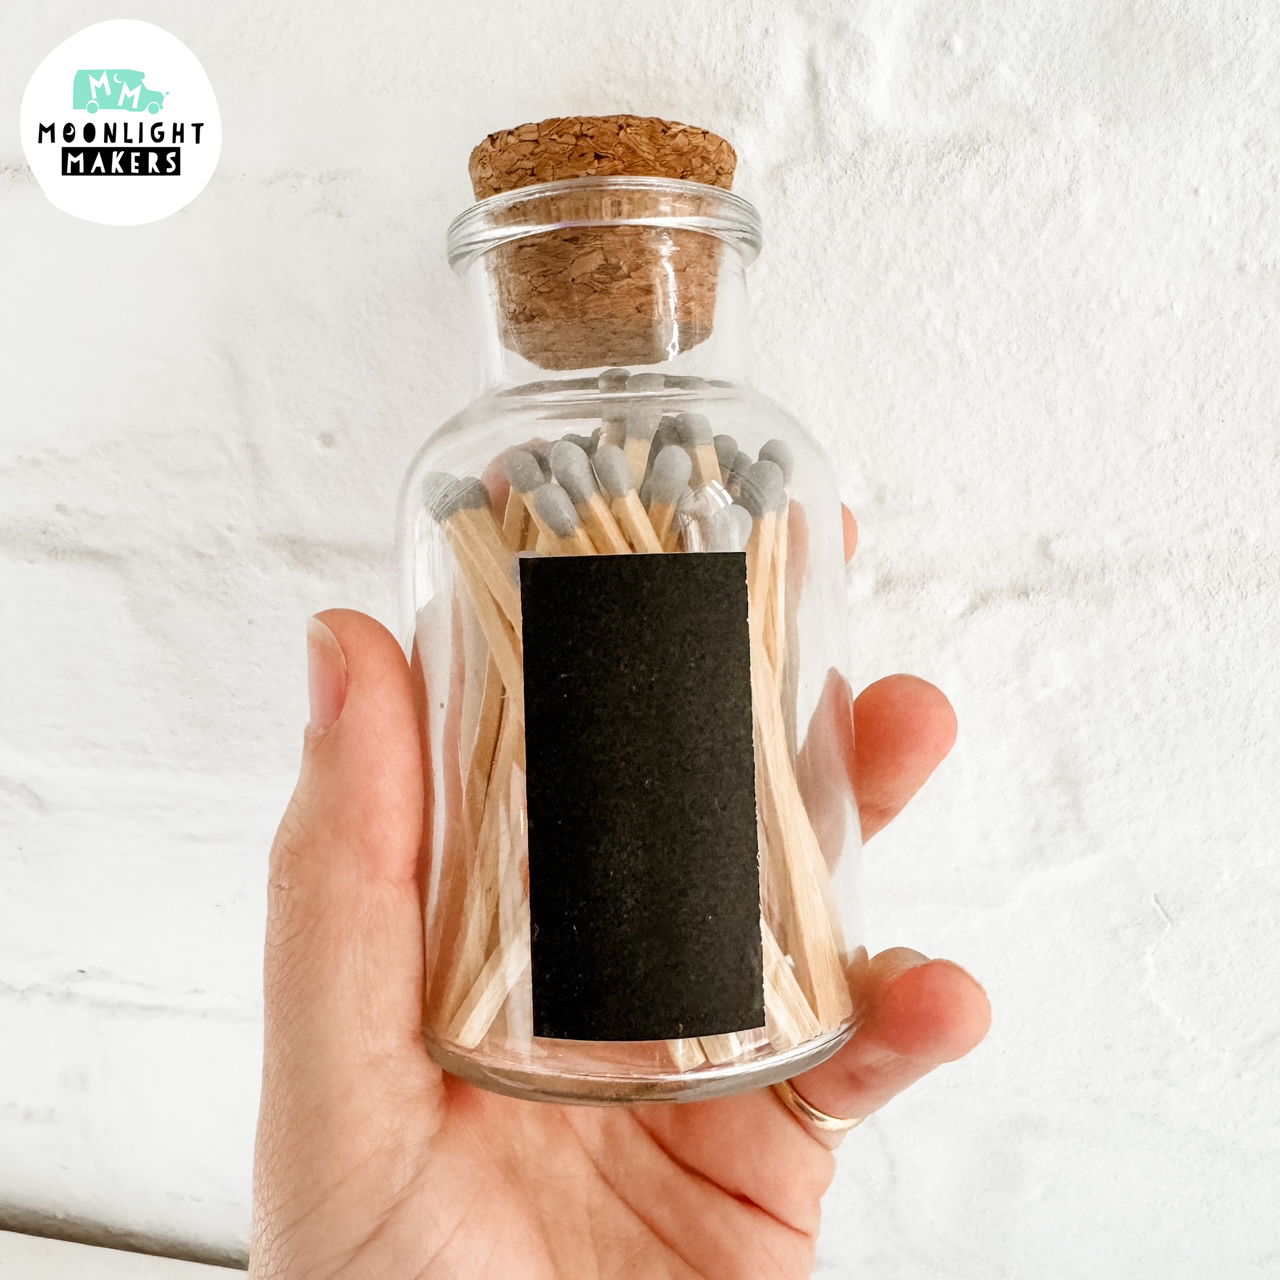 a person holding a glass jar filled with matches